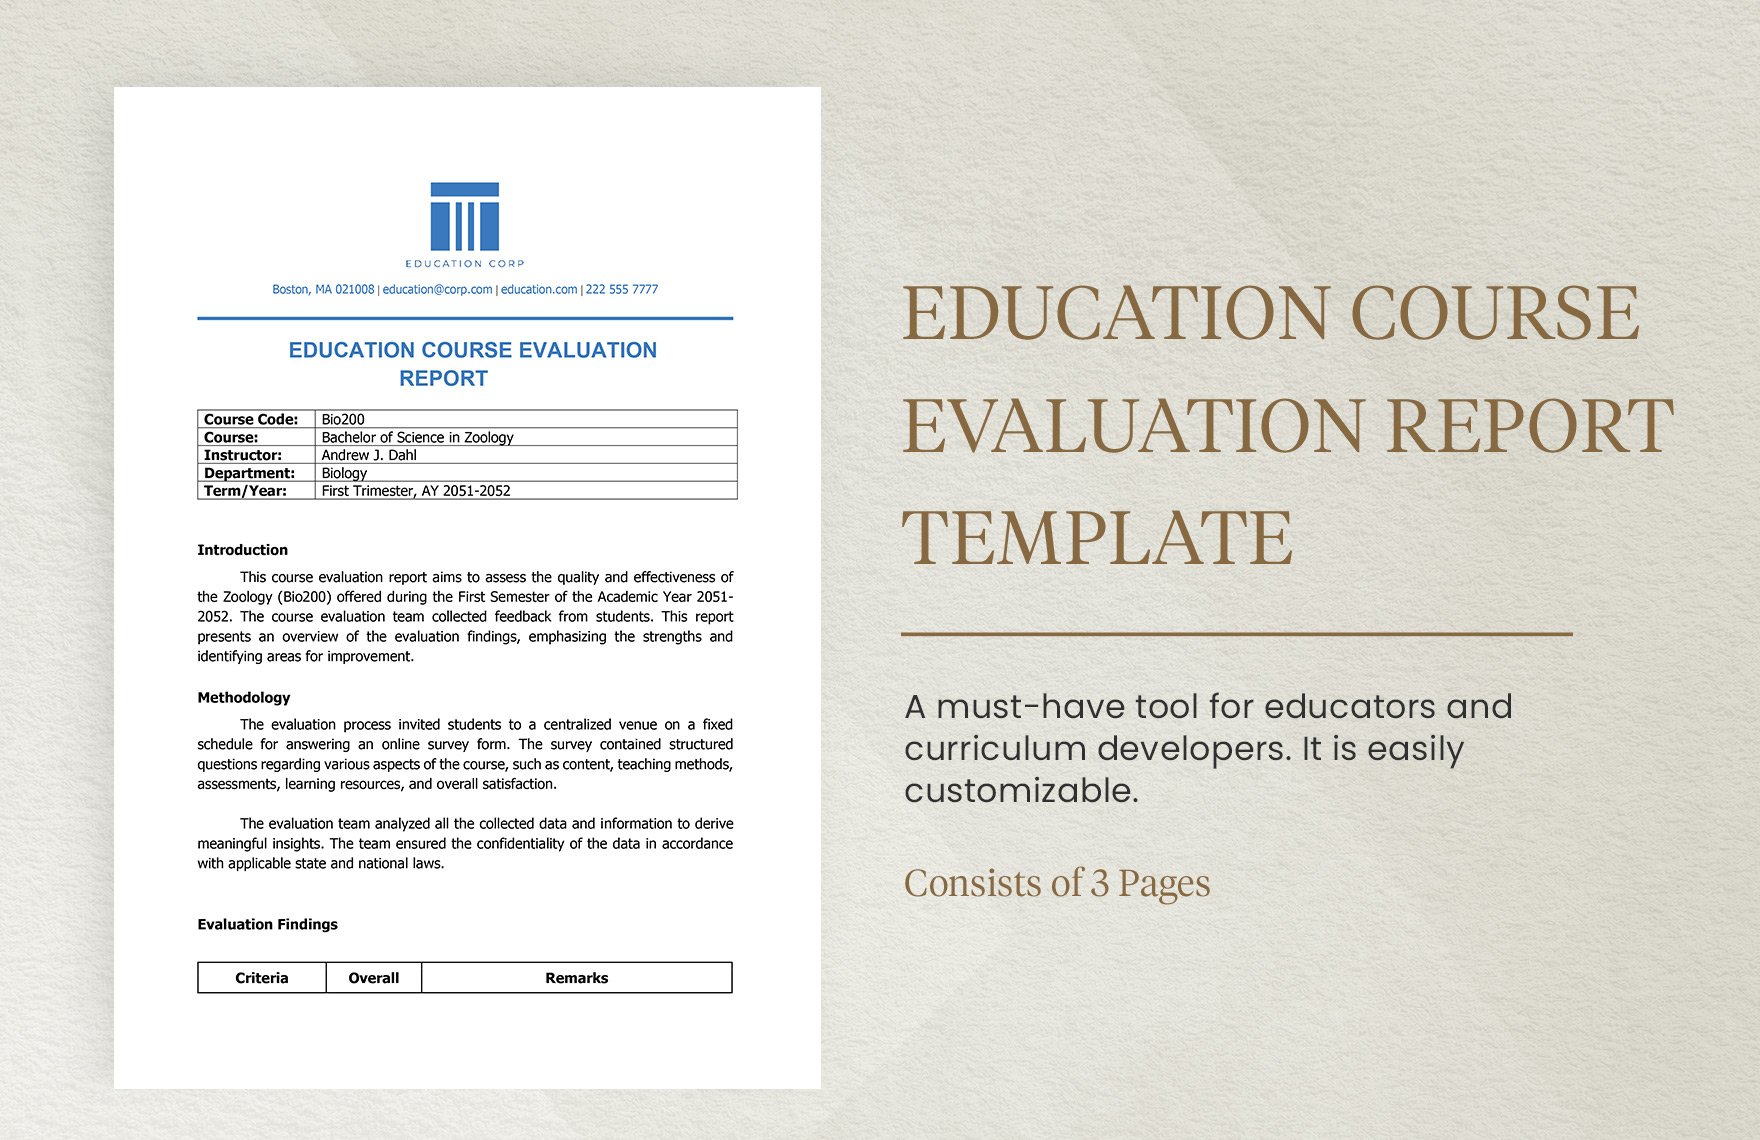 Education Course Evaluation Report Template in Word, Google Docs